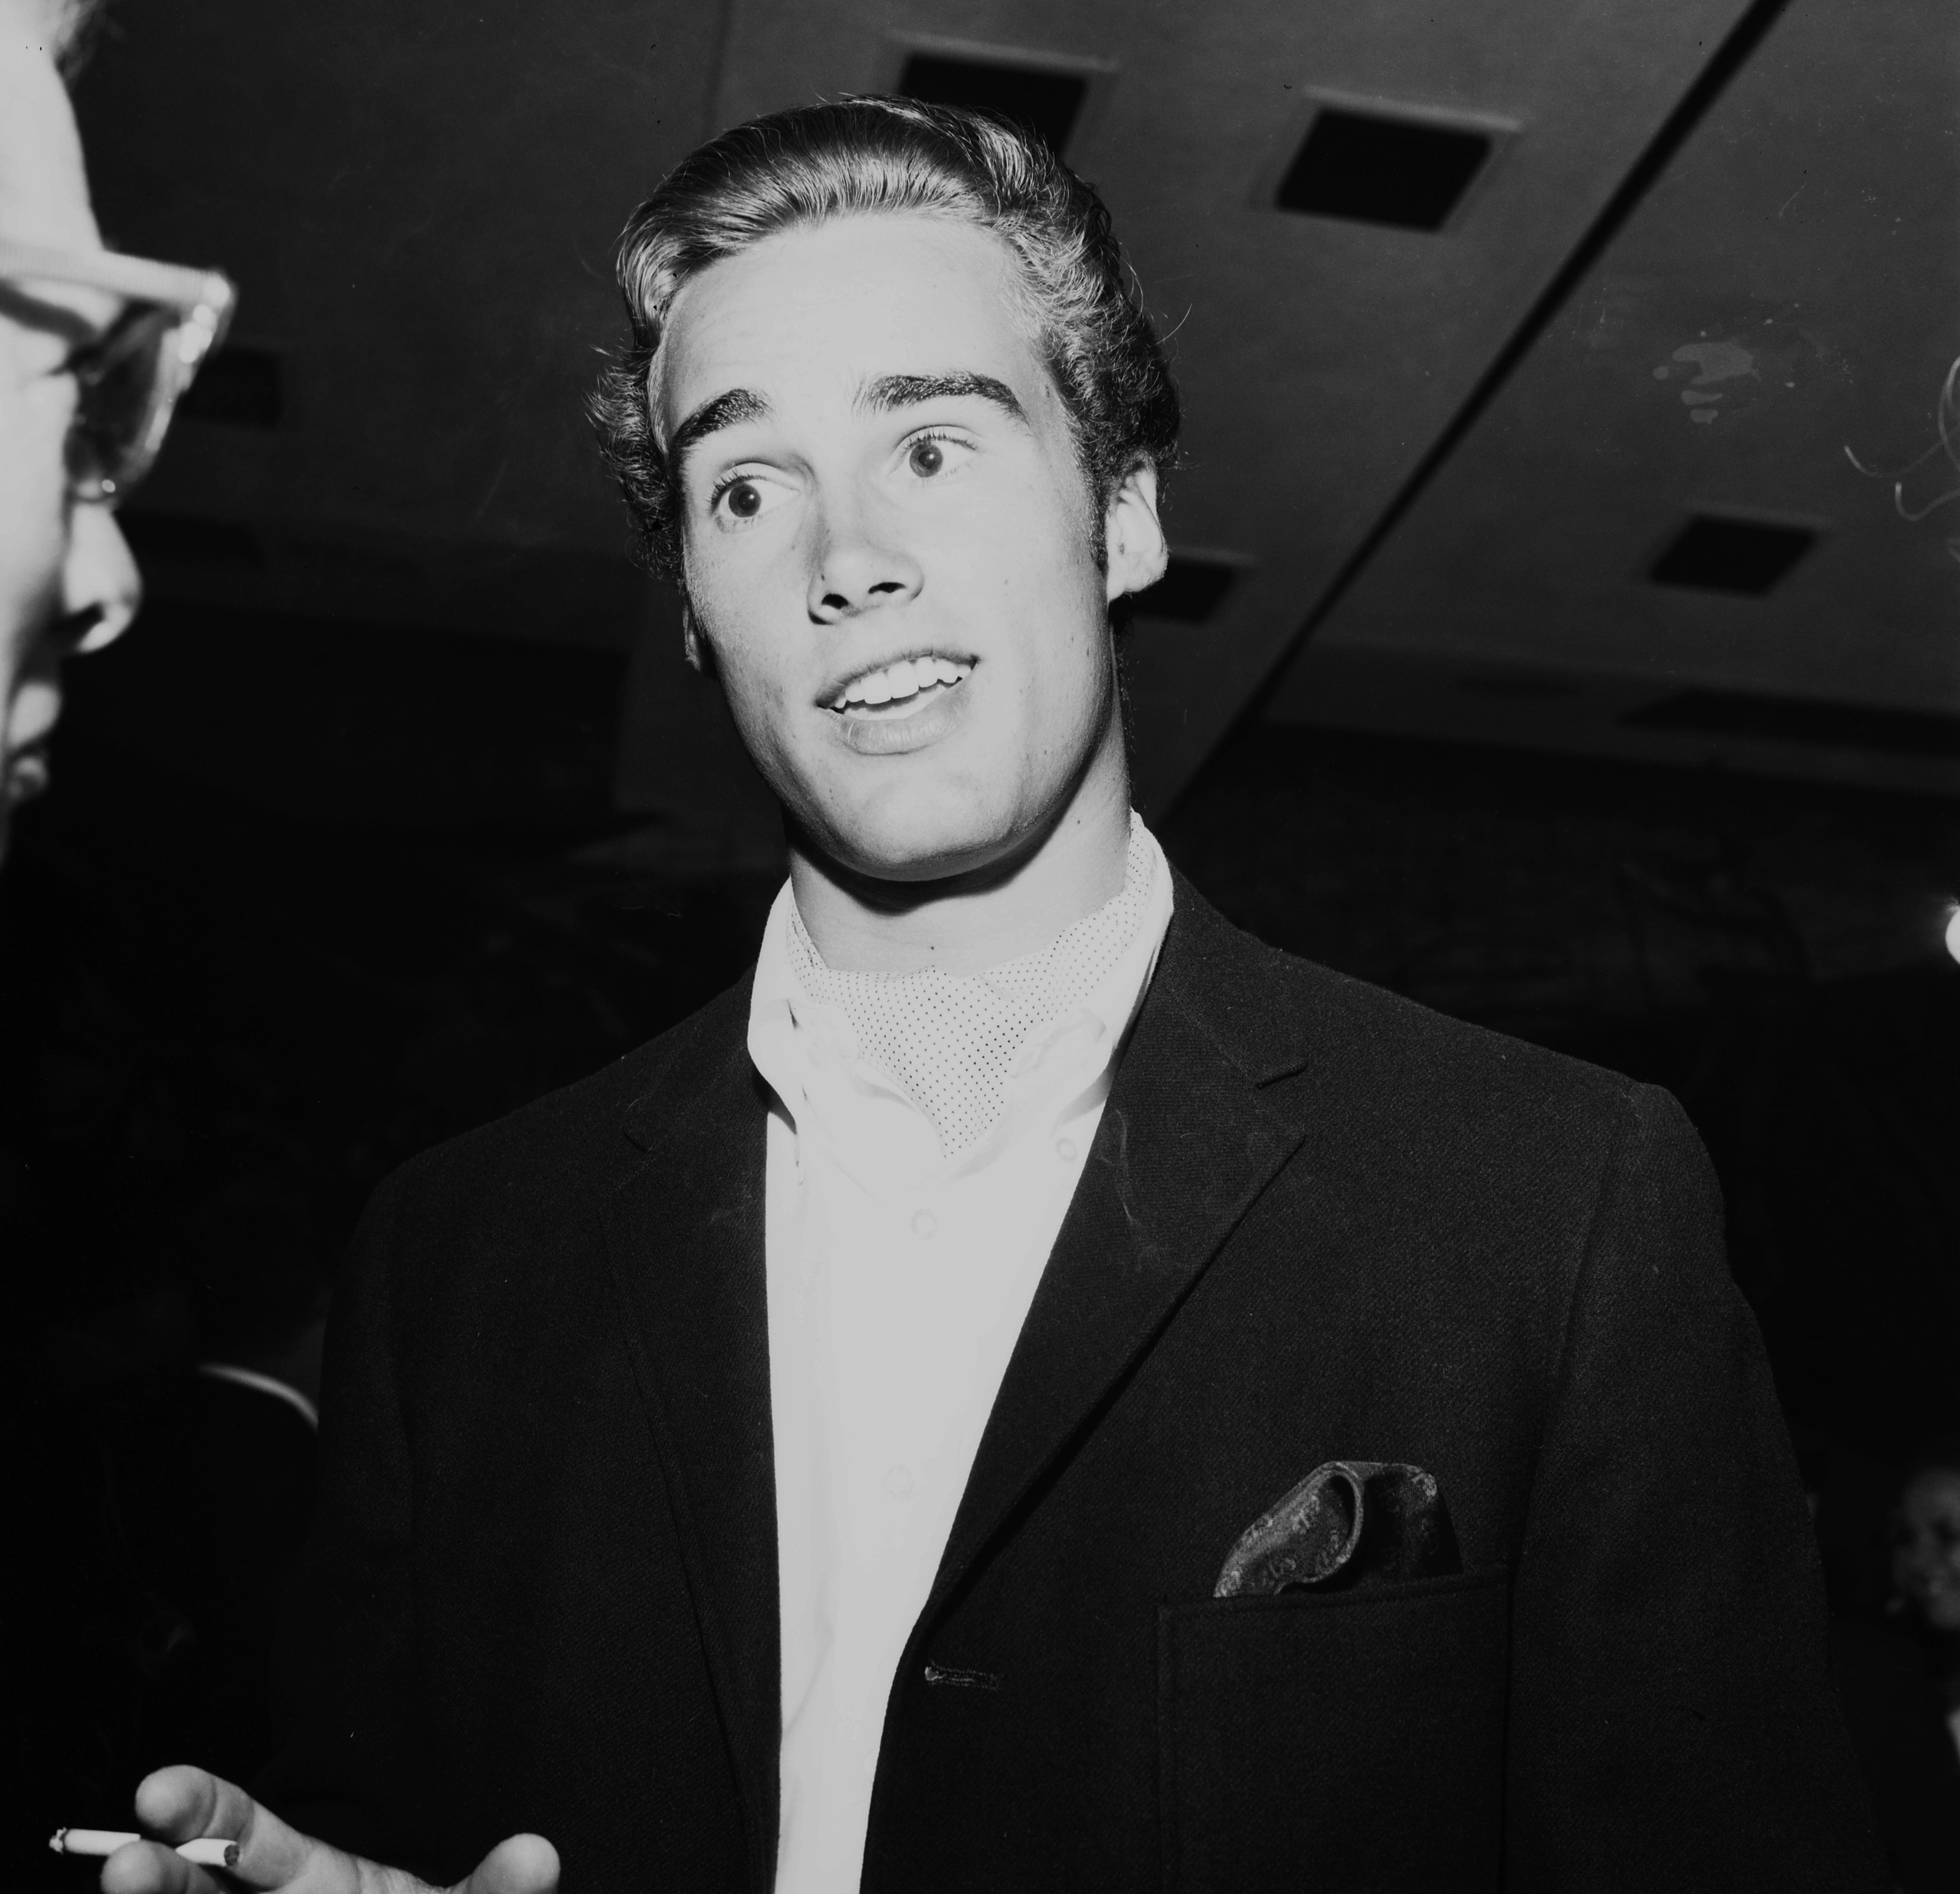 Sean Flynn attends a party on 01 January, 1961 in Los Angeles, California | Photo: Getty Images